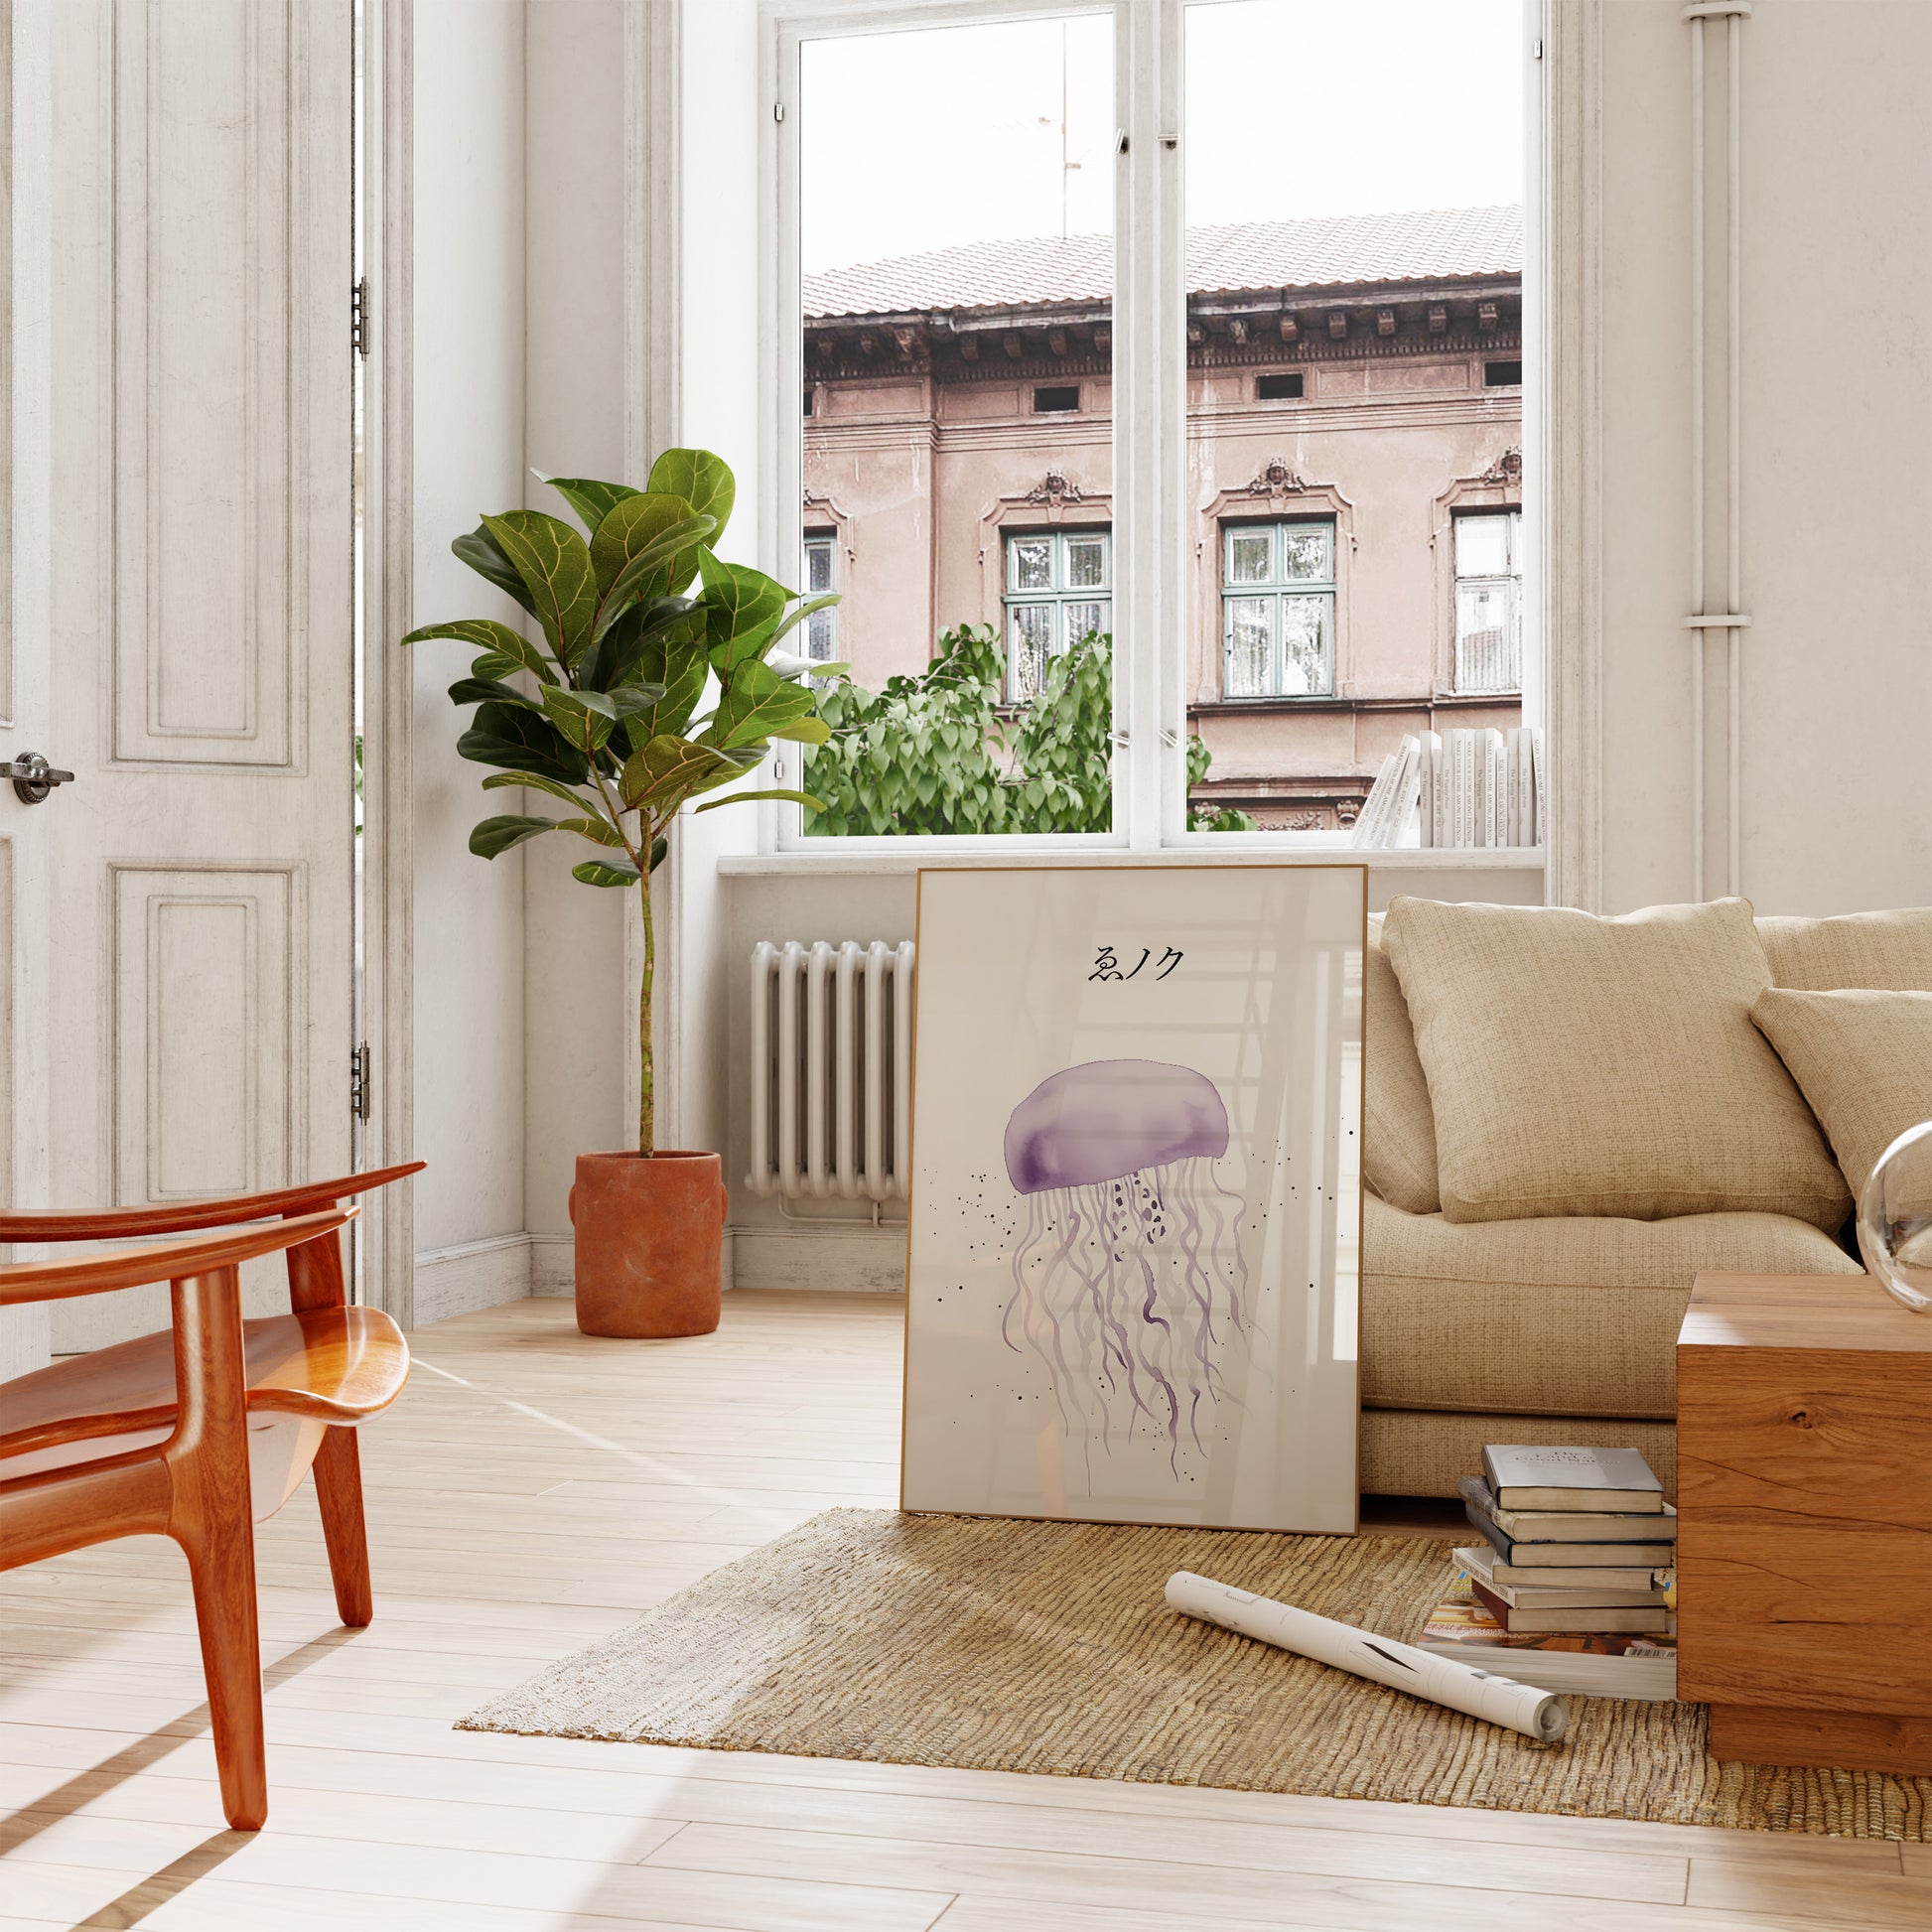 A cozy living room with a sofa, a wooden table, a potted plant, and artwork leaning against the wall.